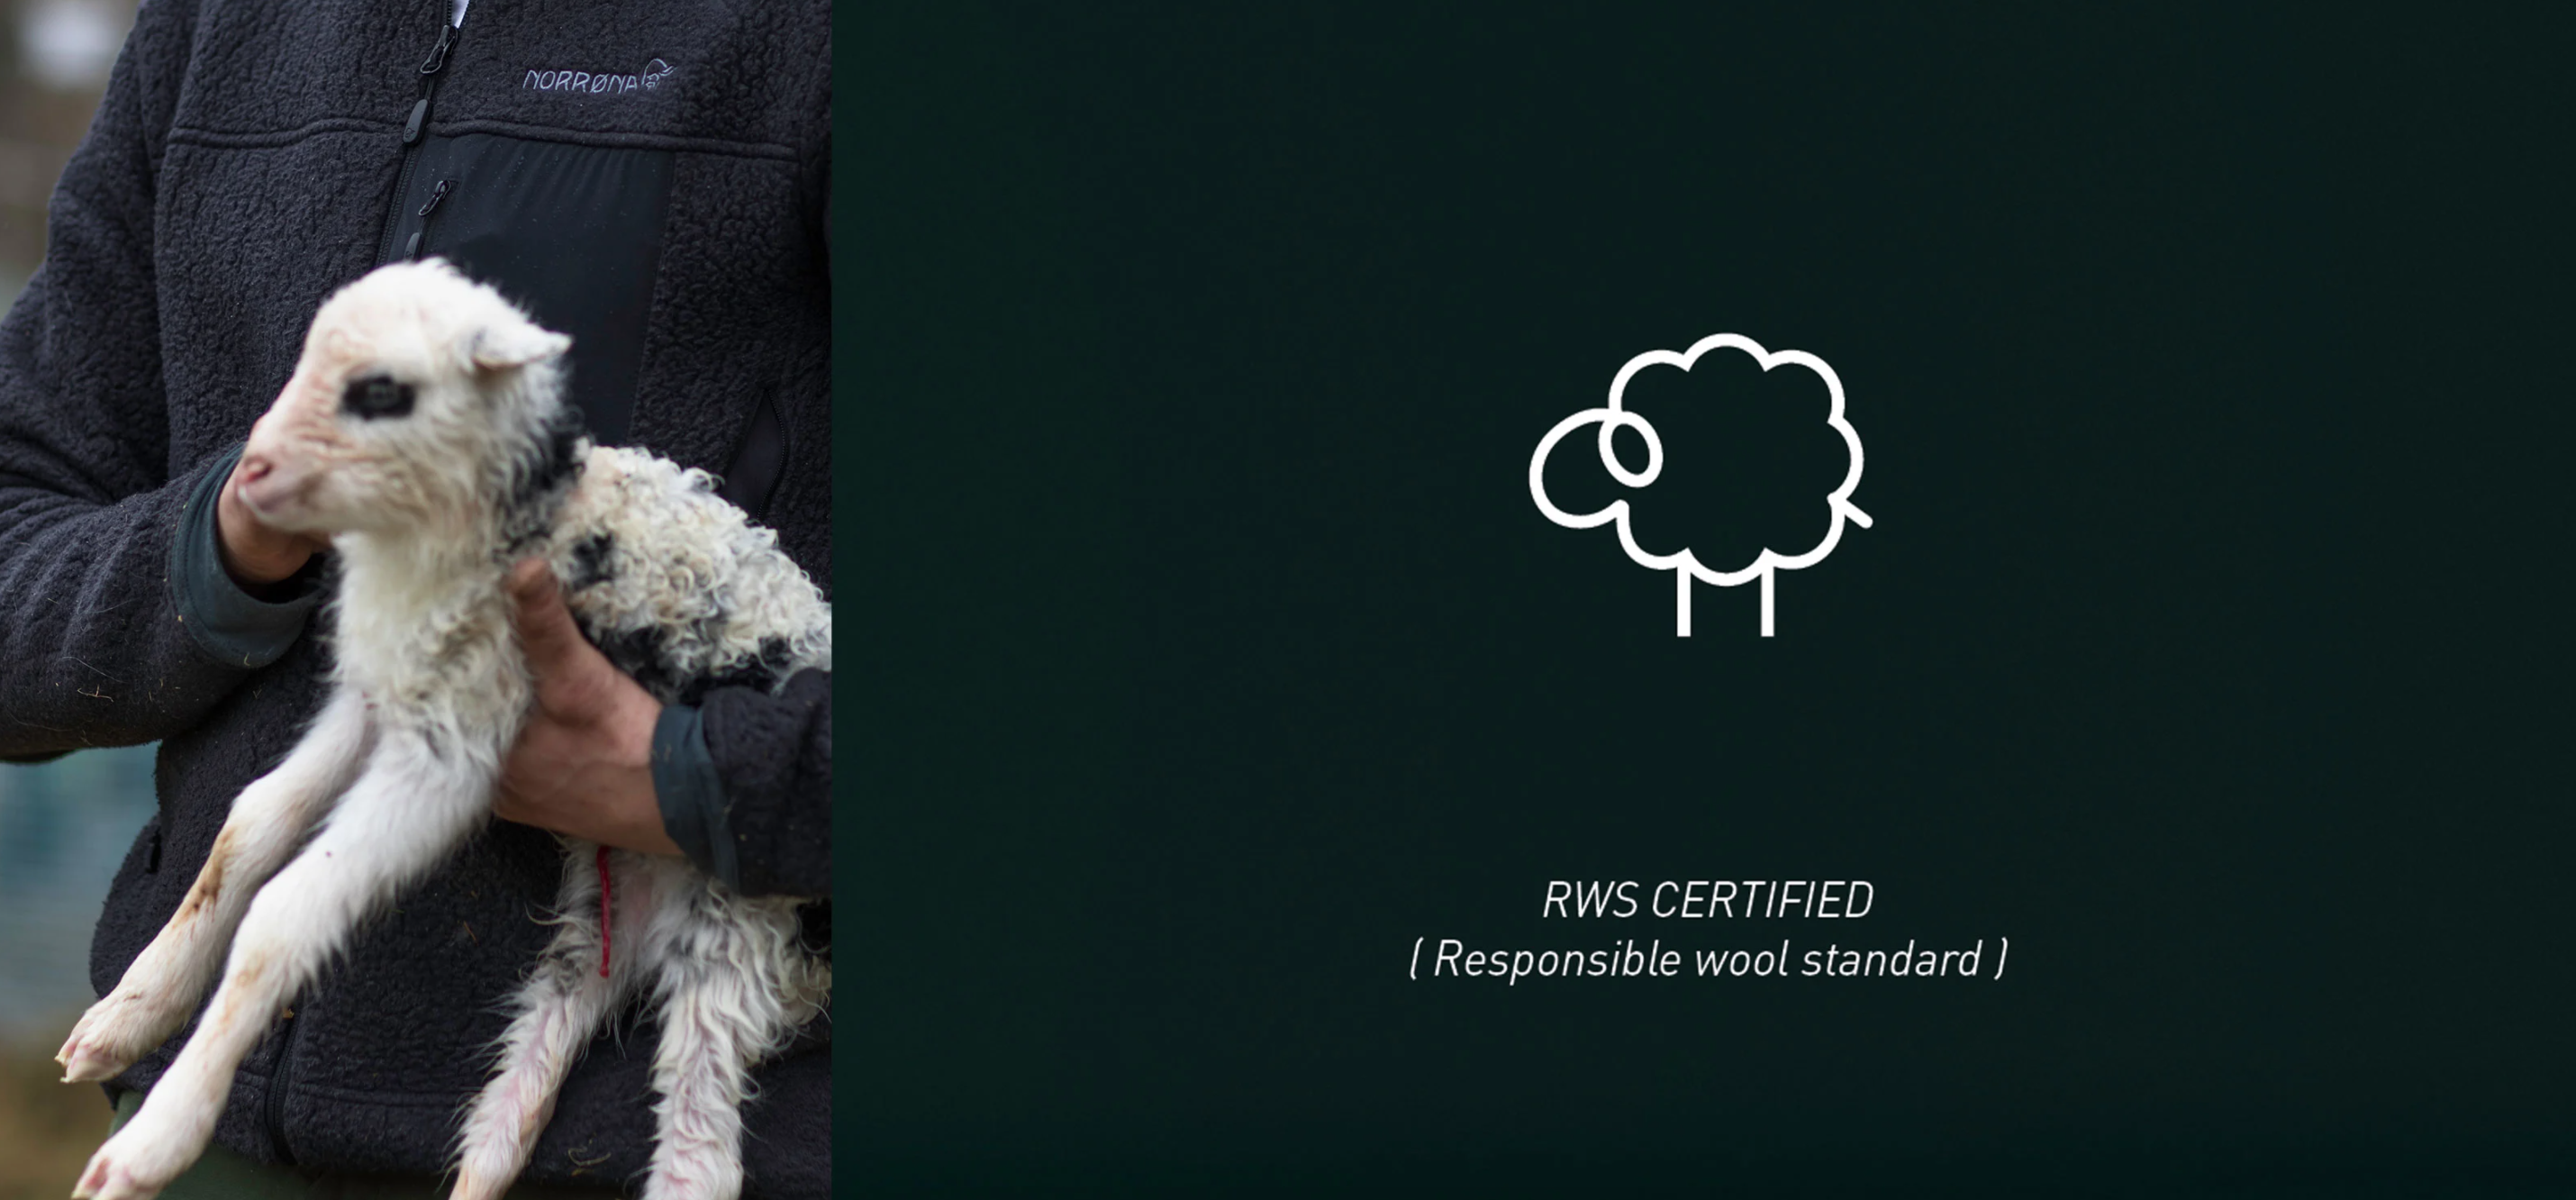 Certification you should know about if you care about fashion and sustainability™